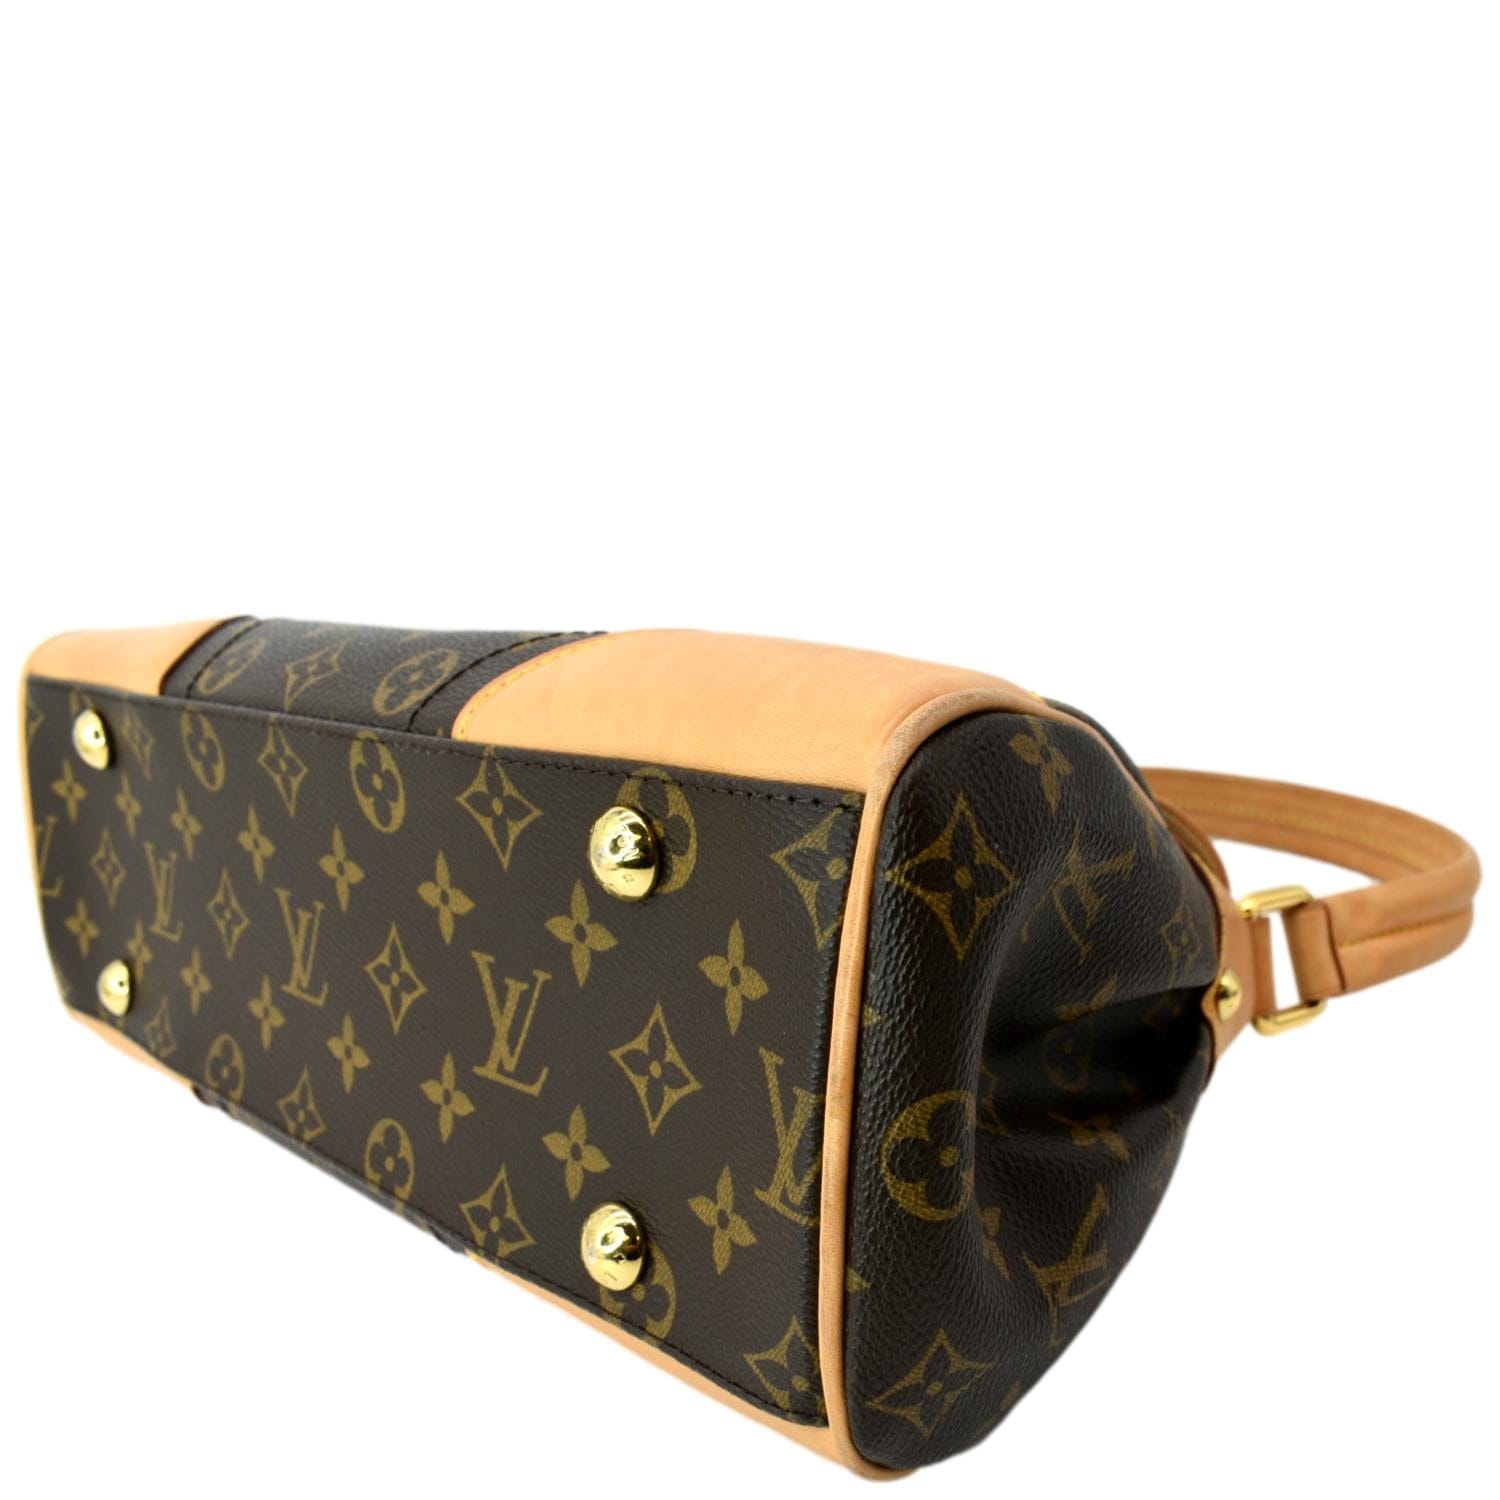 Brown and tan monogram coated canvas Louis Vuitton Beverly MM with